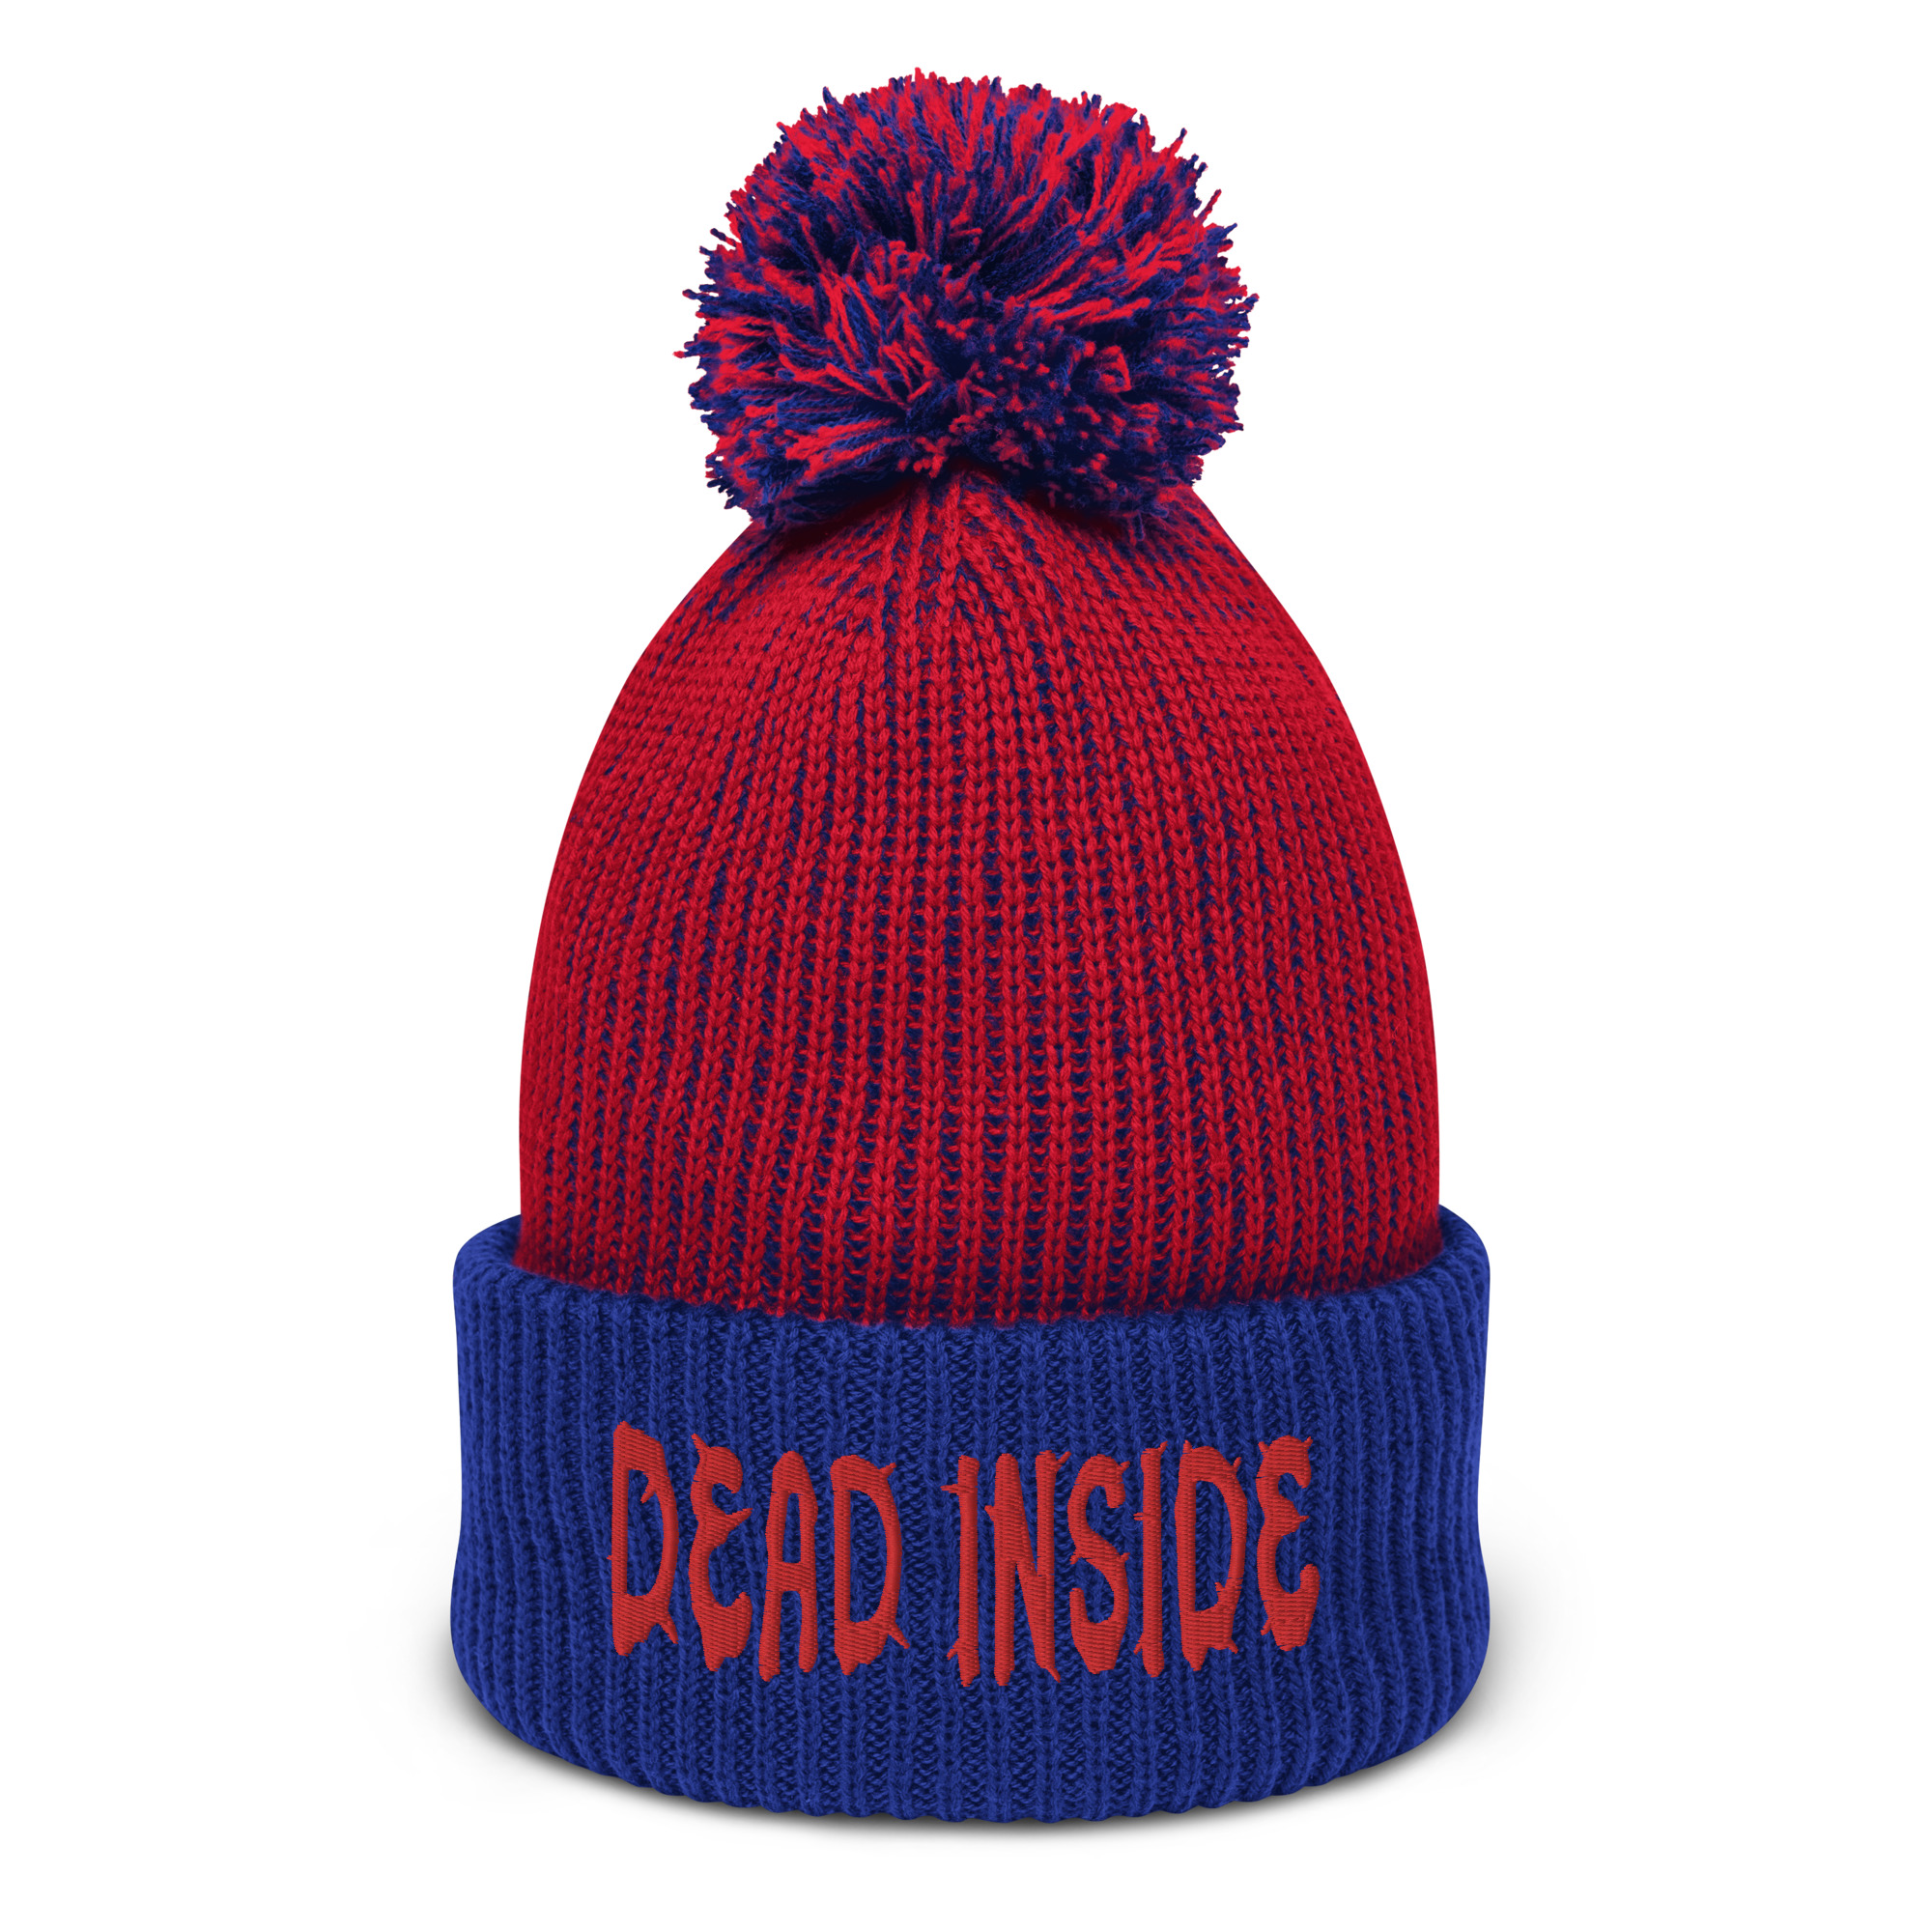 Featured image for “Dead inside - Red / Navy speckled Pom-Pom Beanie”